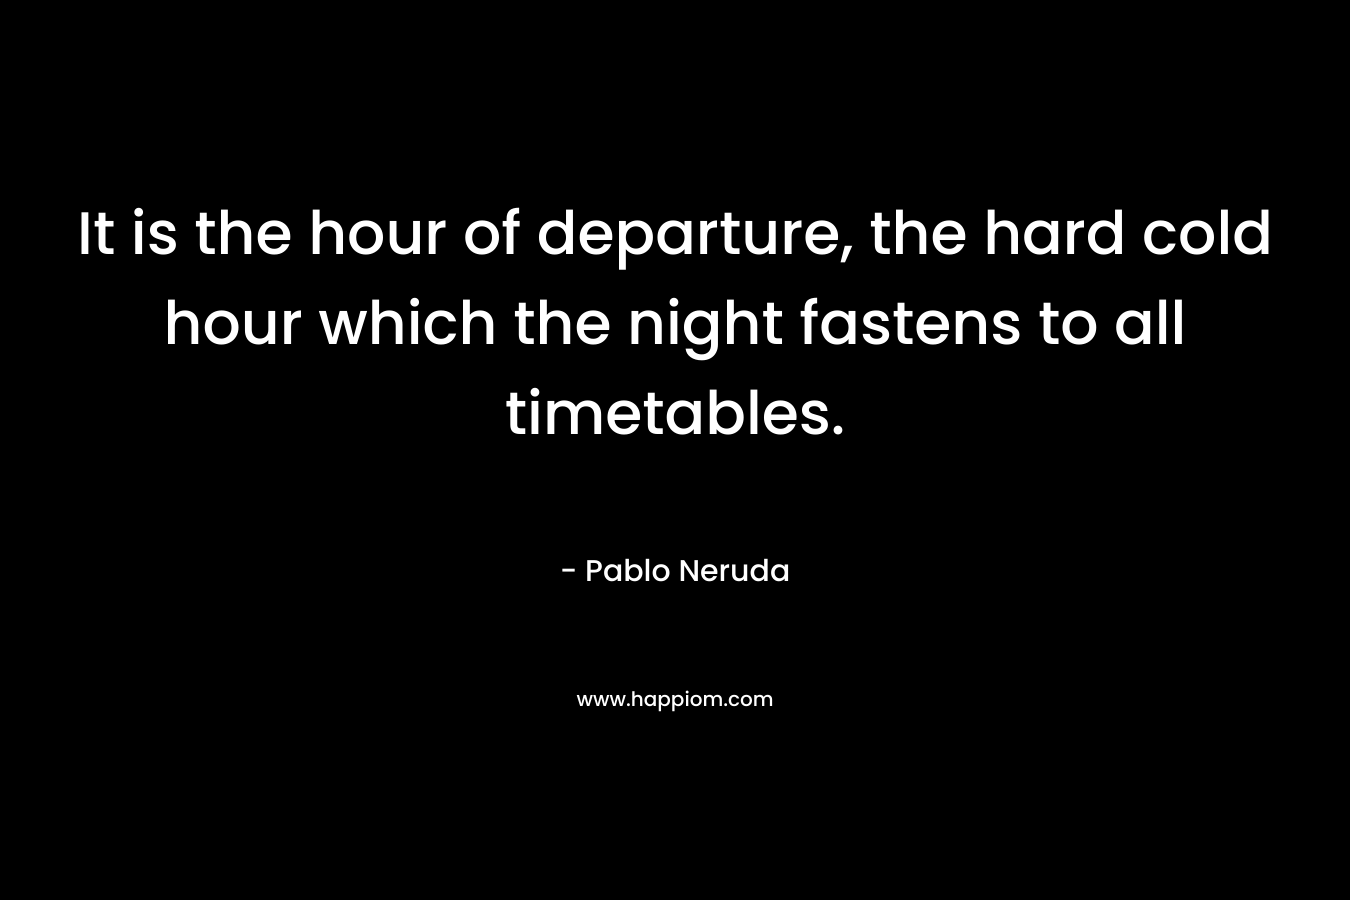 It is the hour of departure, the hard cold hour which the night fastens to all timetables.